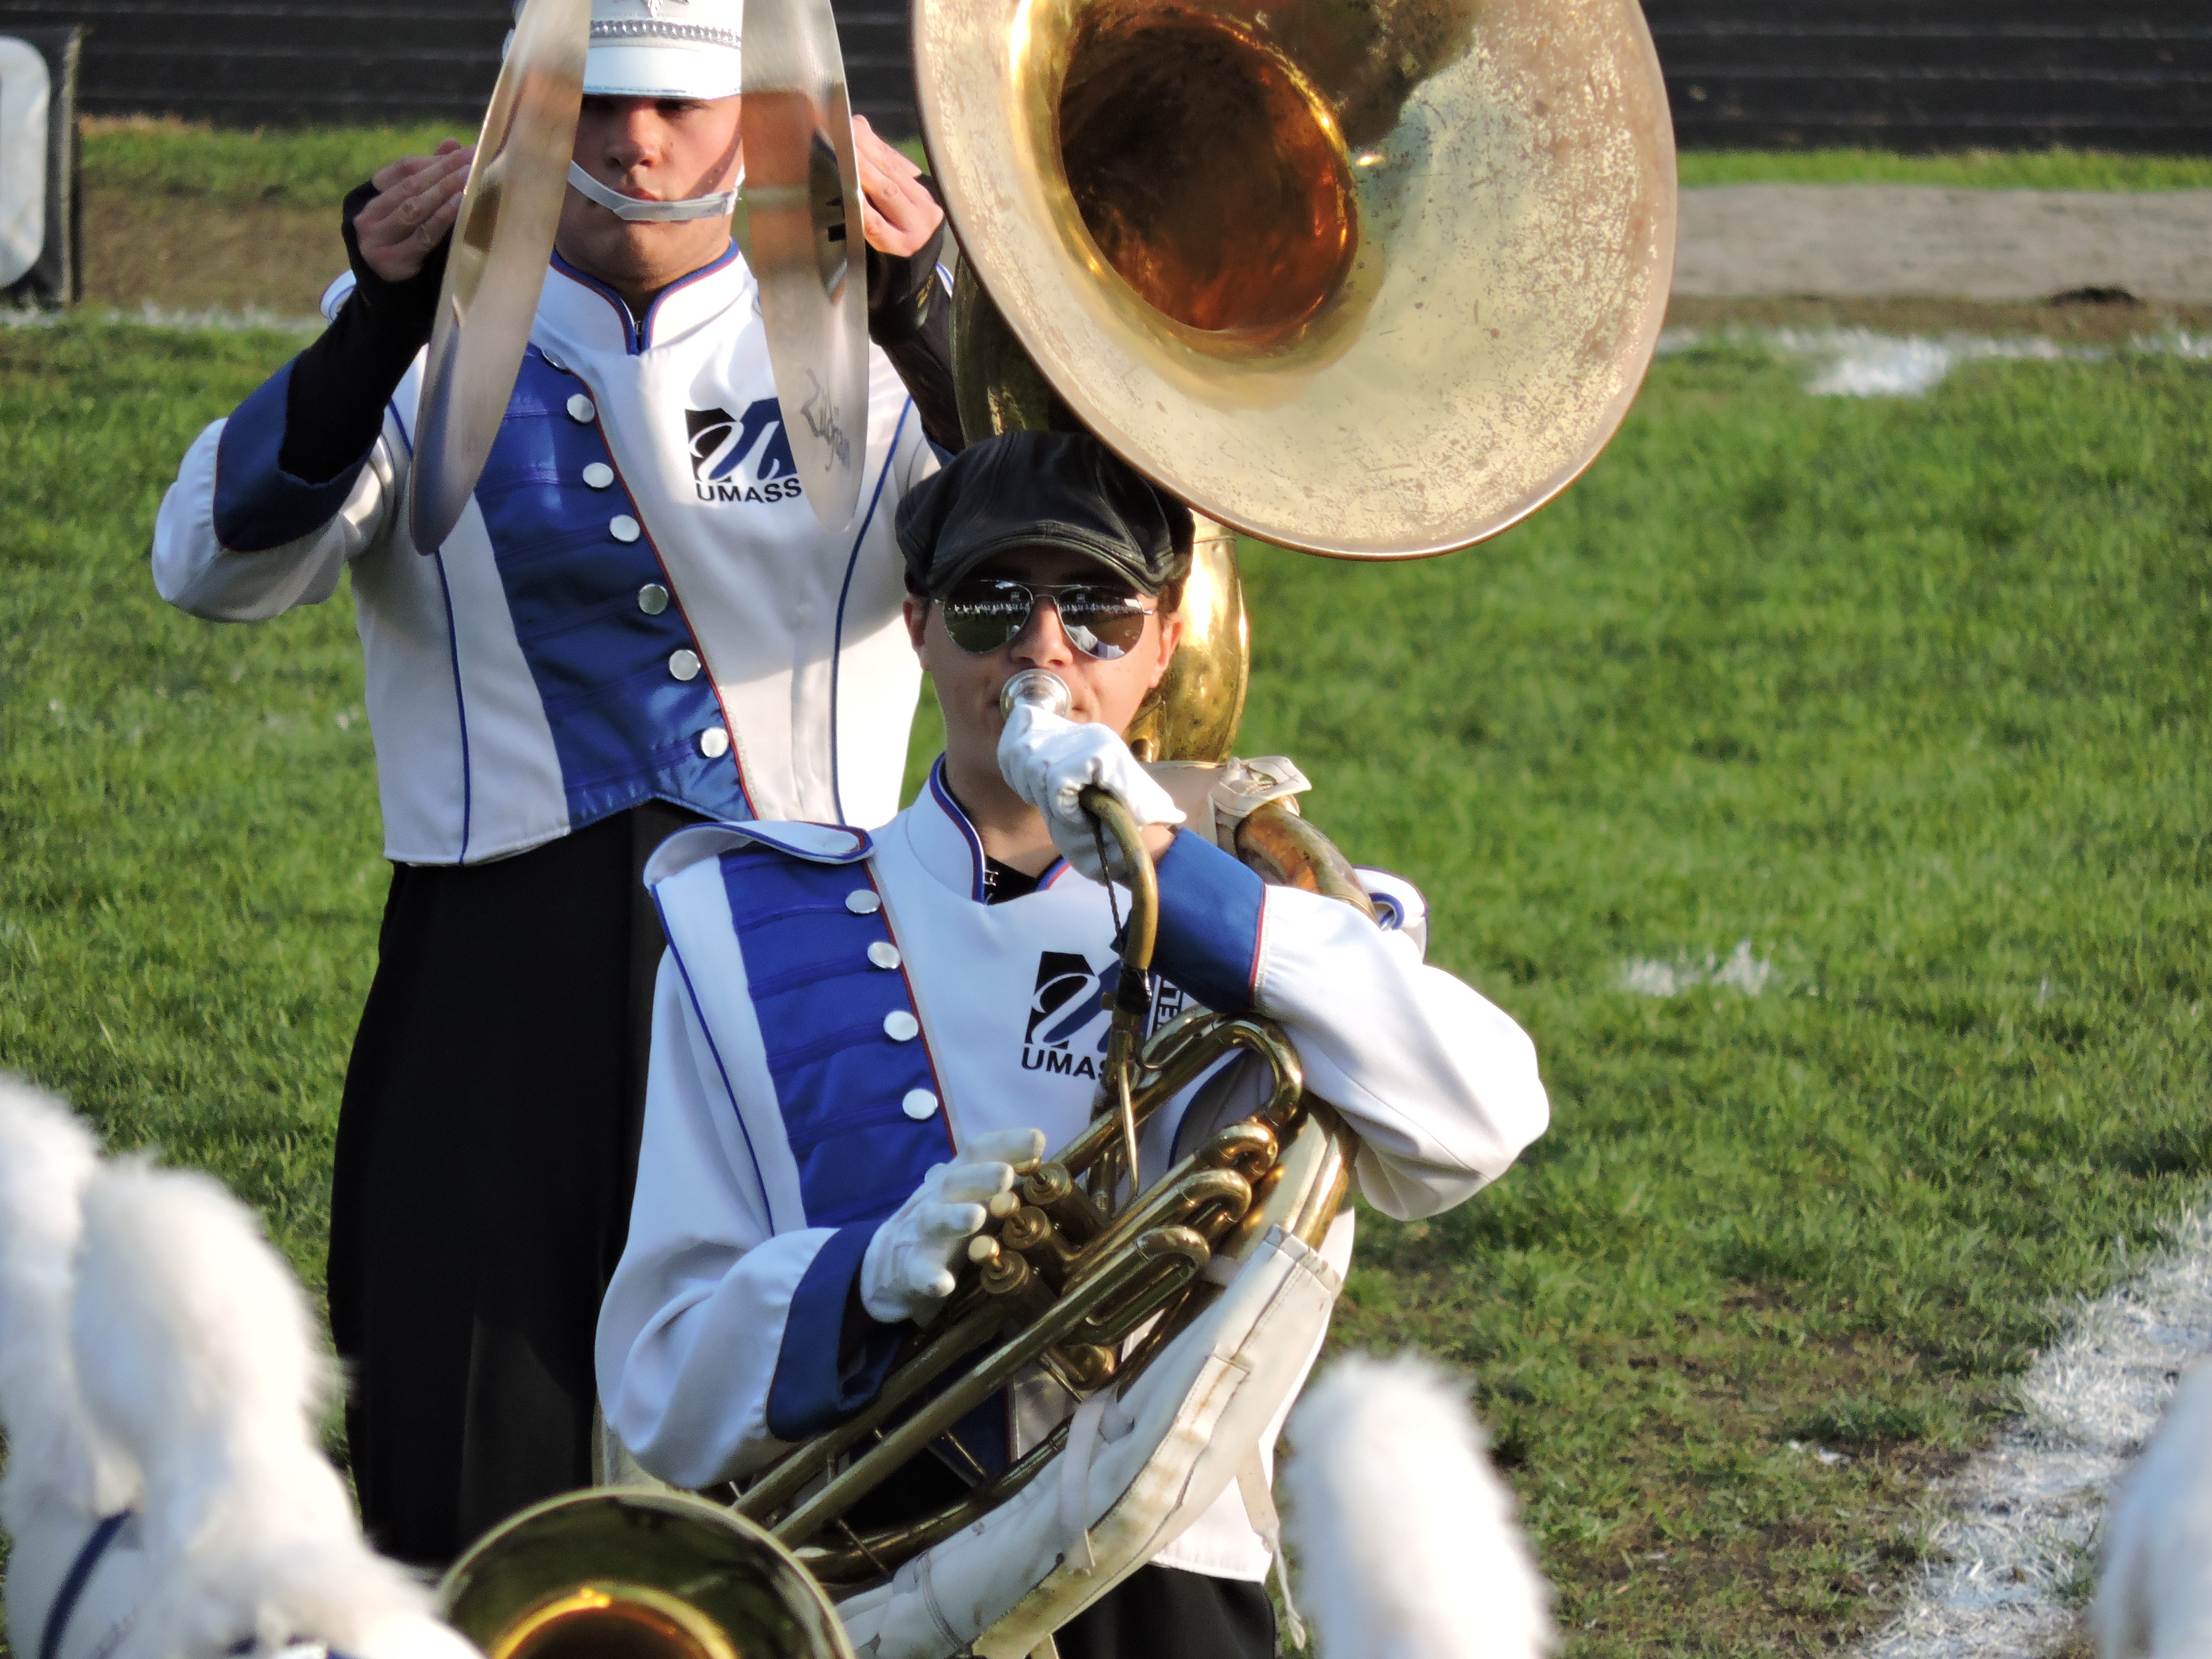 shows two musicians, a Sousaphone & Cymbal player